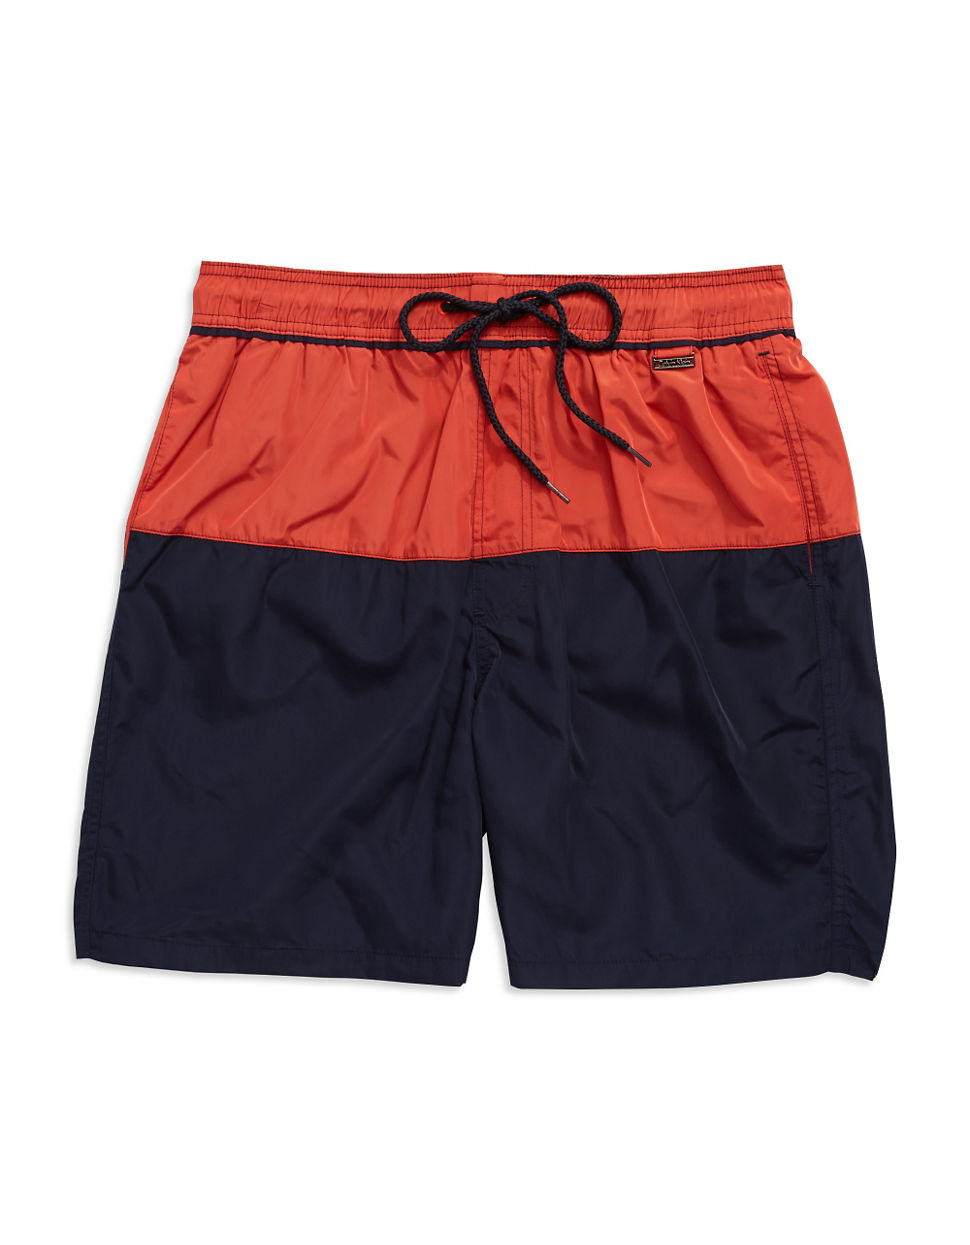 Calvin Klein Colorblocked Swim Trunks in Red for Men (Raw Red) | Lyst